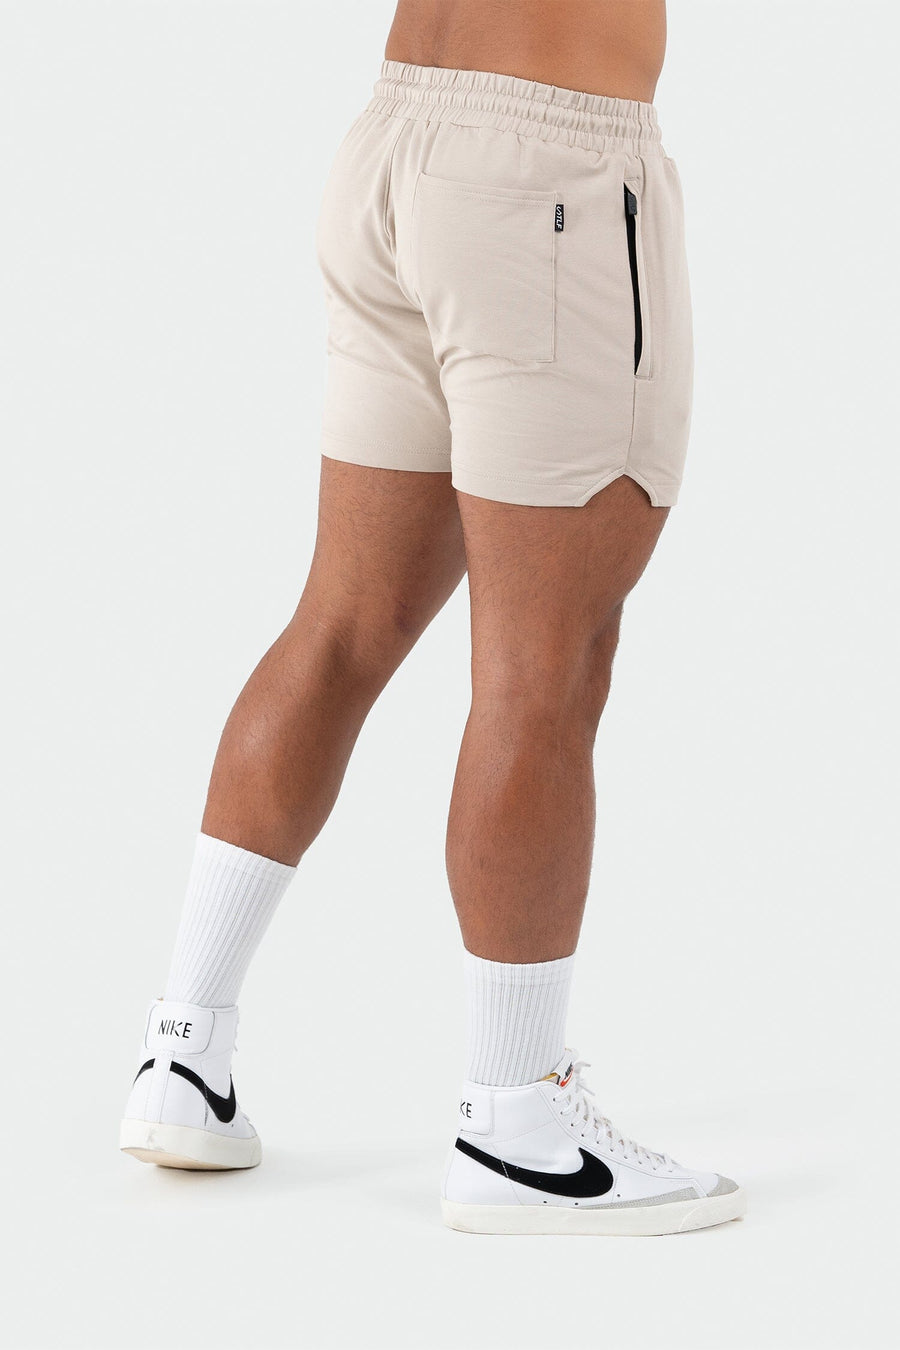 TLF Take Life Further 5 Inch - Sand - 4 Fitted Shorts